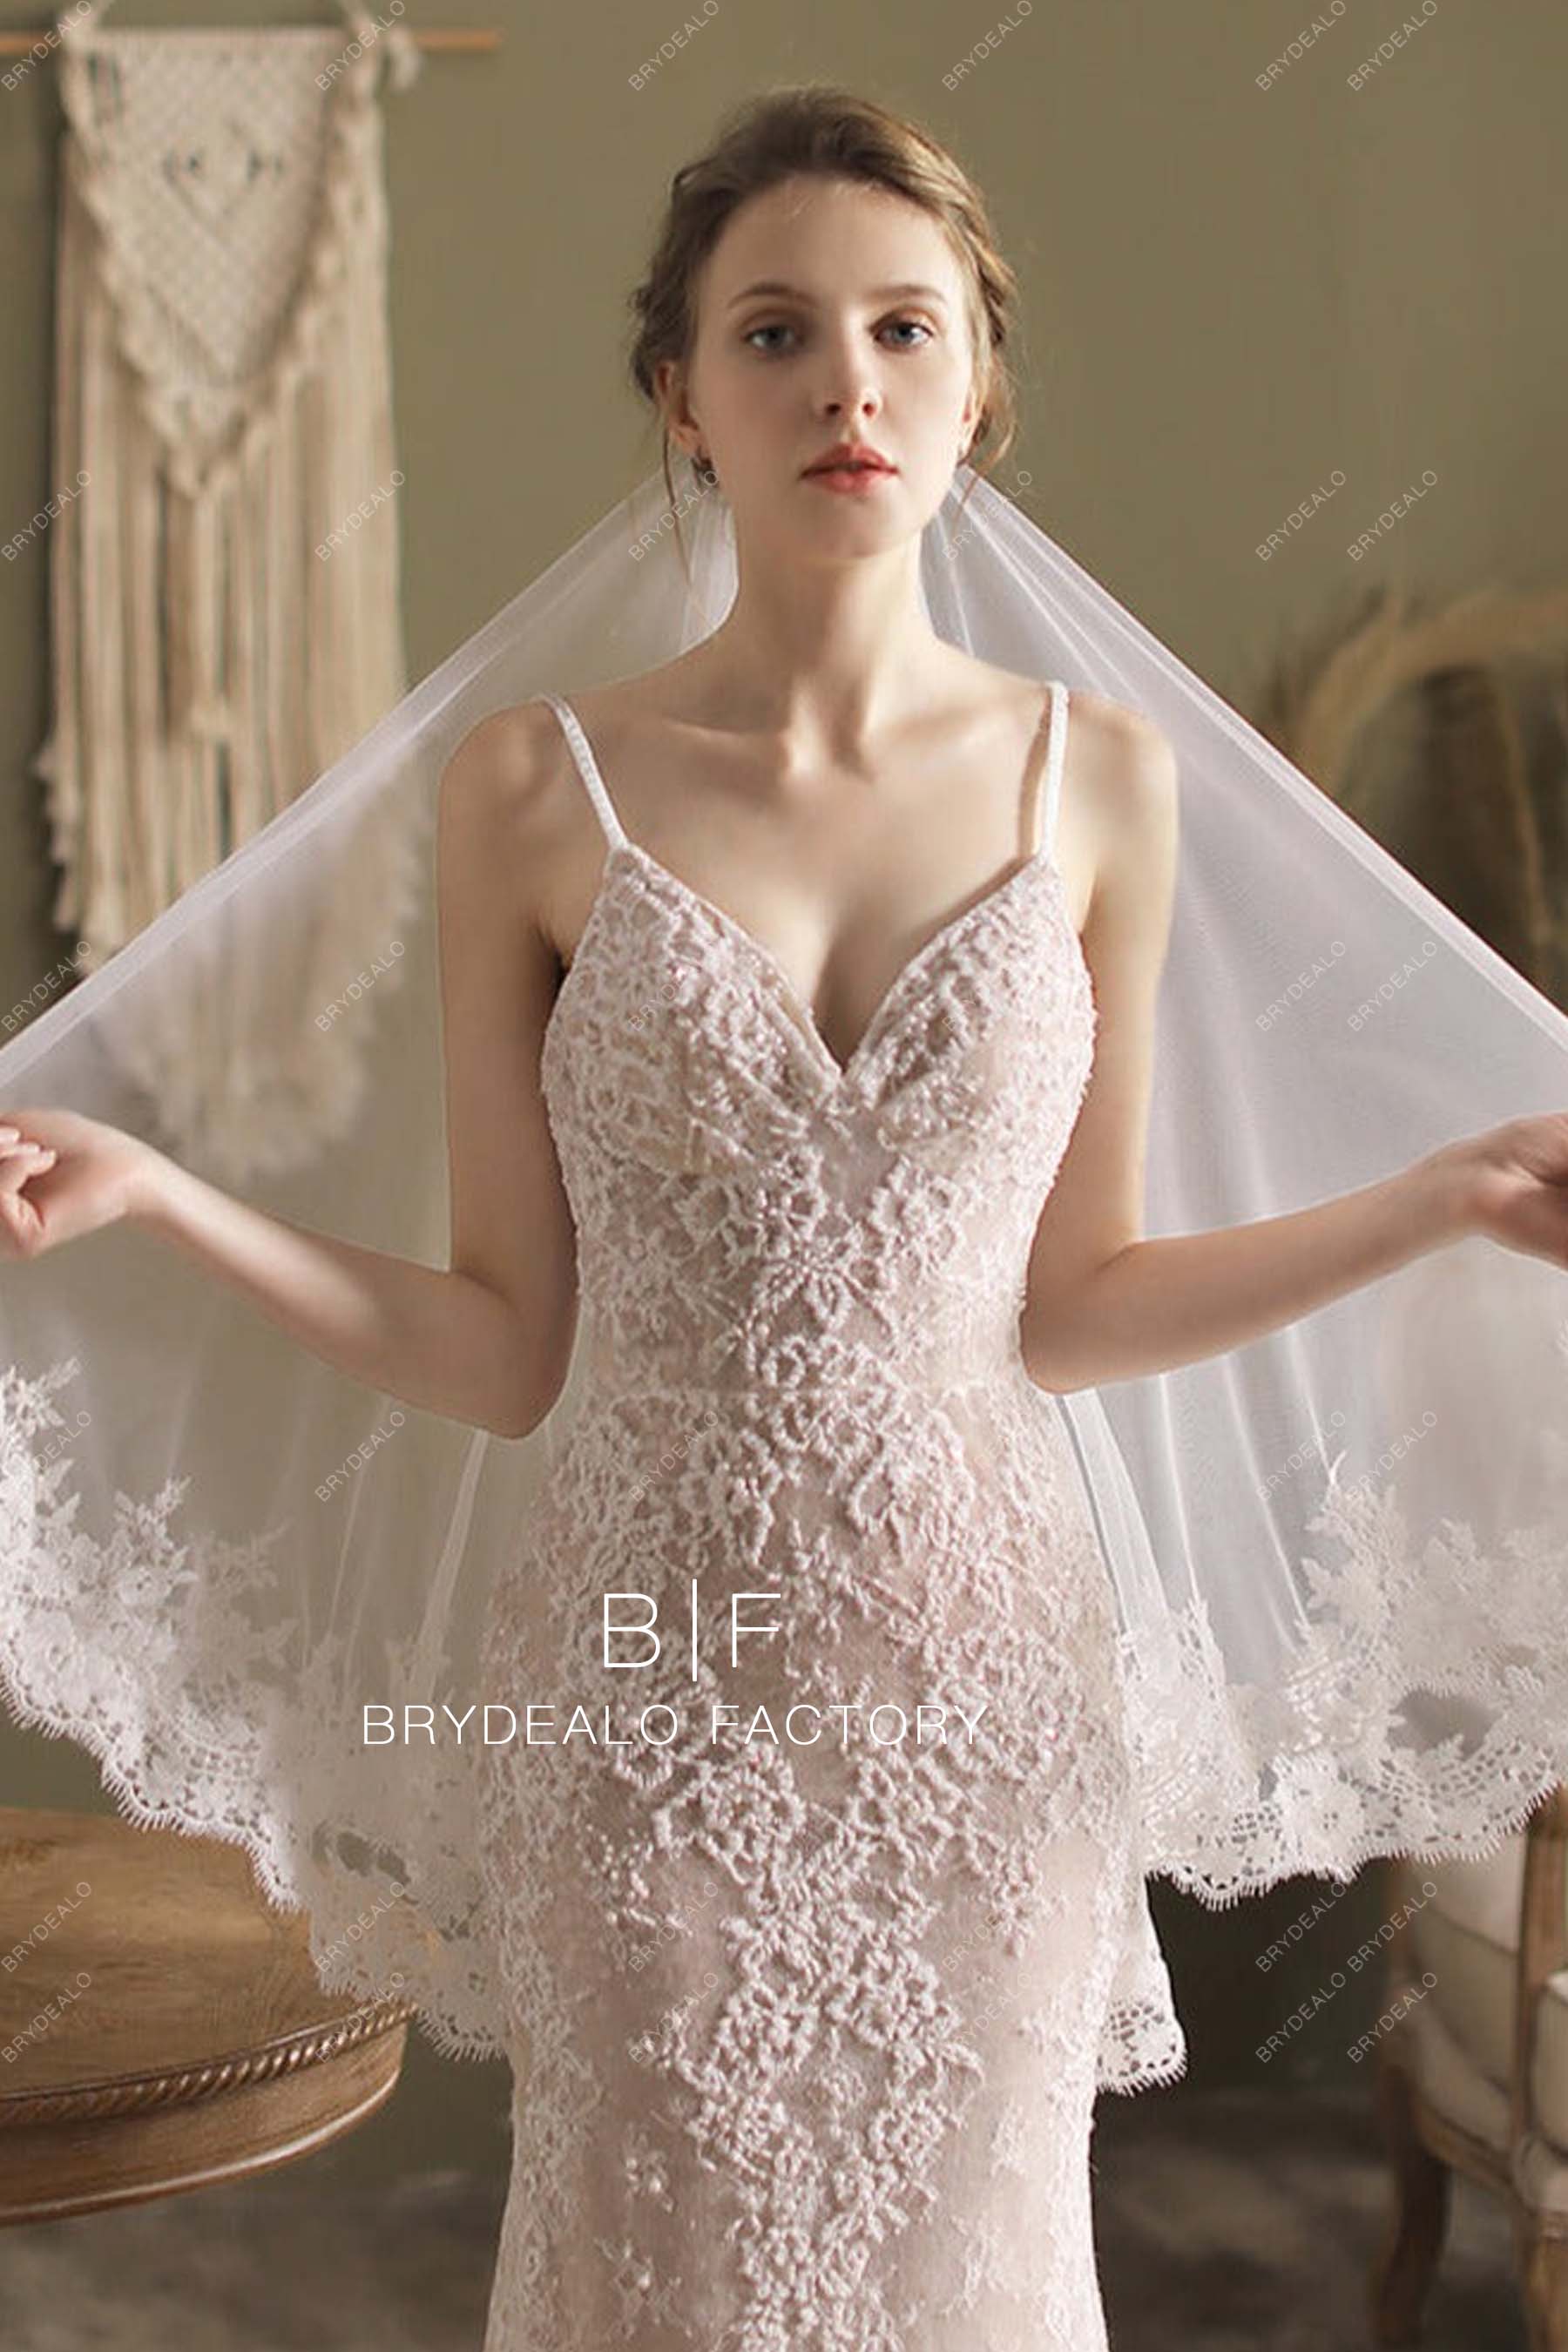 Two-Tiered Fingertip Length Bridal Veil